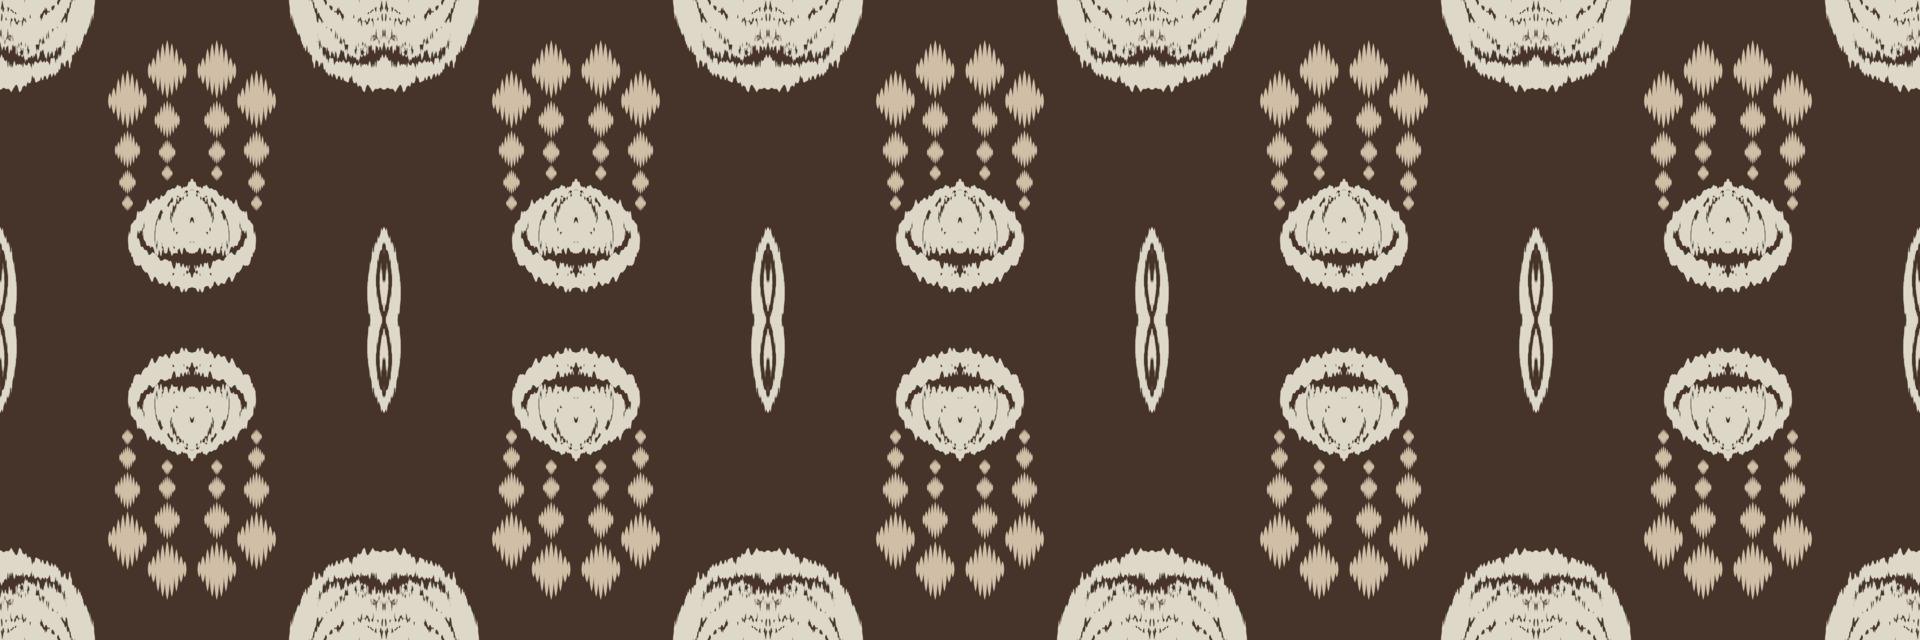 Ikat flower tribal cross Geometric Traditional ethnic oriental design for the background. Folk embroidery, Indian, Scandinavian, Gypsy, Mexican, African rug, wallpaper. vector